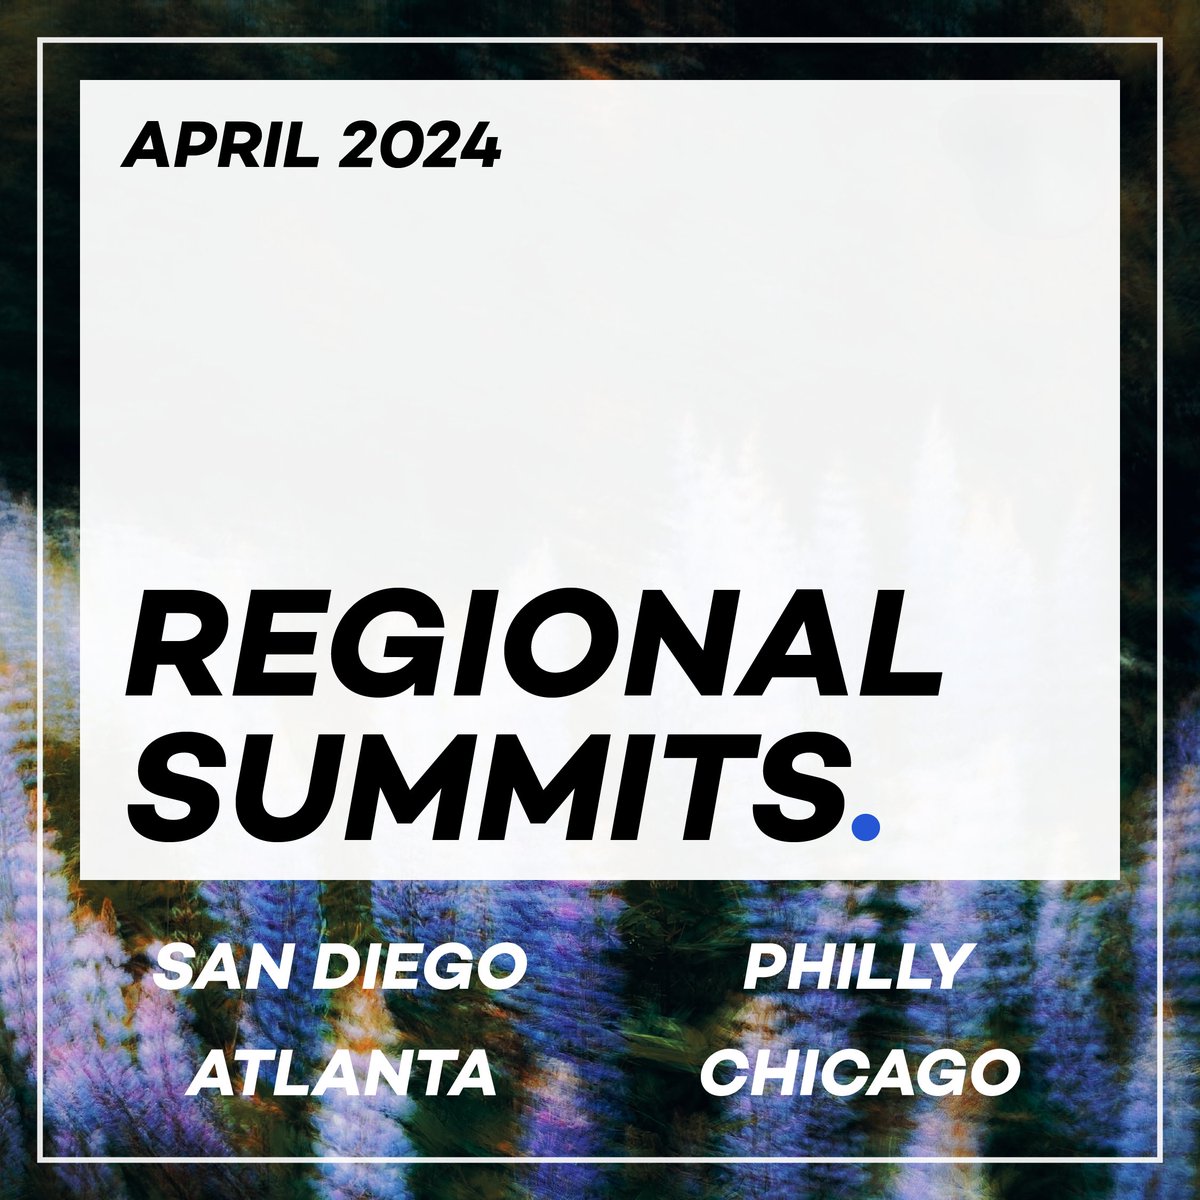 🌷We've almost reached the first Regional Summit location!  Find out how #PlanFees can elevate your practice by joining these interactive sessions in San Diego:
🌻Advanced Plan Pricing
🌻RPAG Portal - #RFPExpress and PlanFees
🌺 hubs.li/Q02qFL5L0